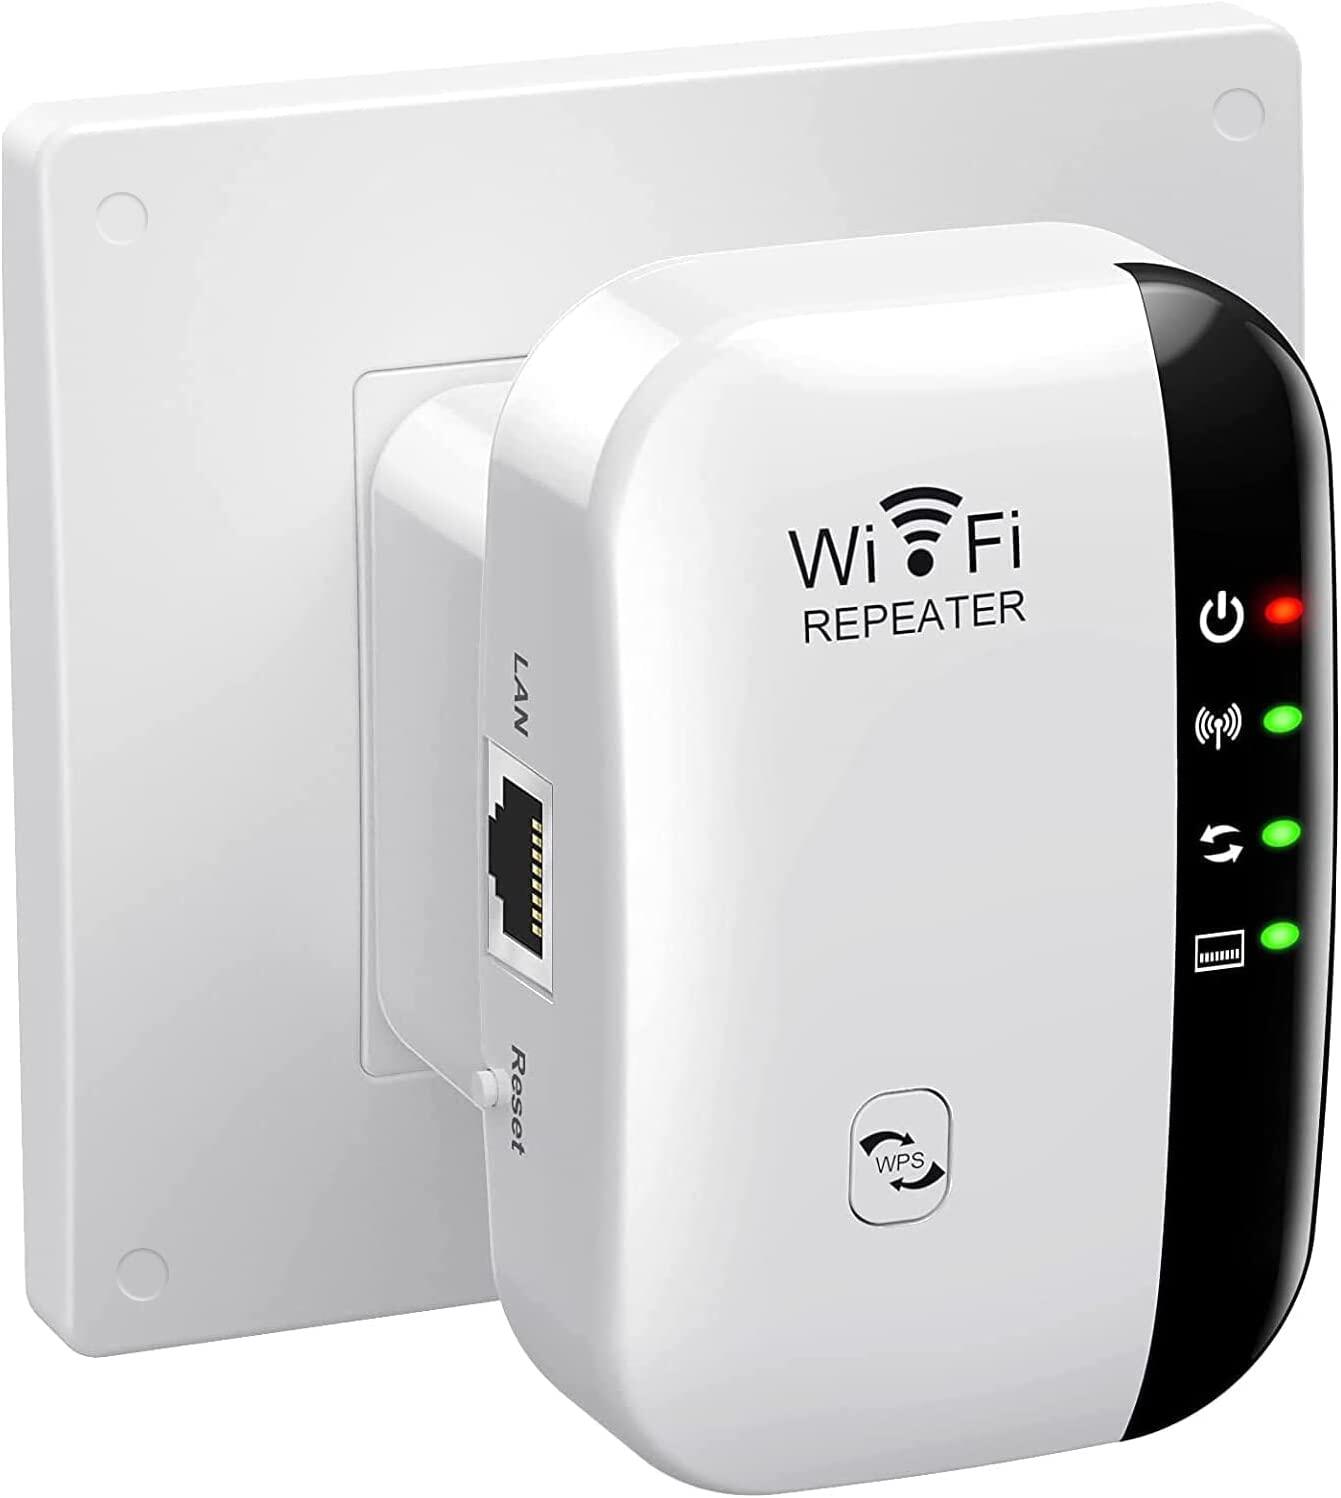 Extends WiFi to Home & Alexa Devices WiFi Range Extender 300Mbps Wireless Repeater Internet Signal Booster 2.4GHz Amplifier for High Speed Long Range Easily Set Up Supports Repeater/Access Point Mode 